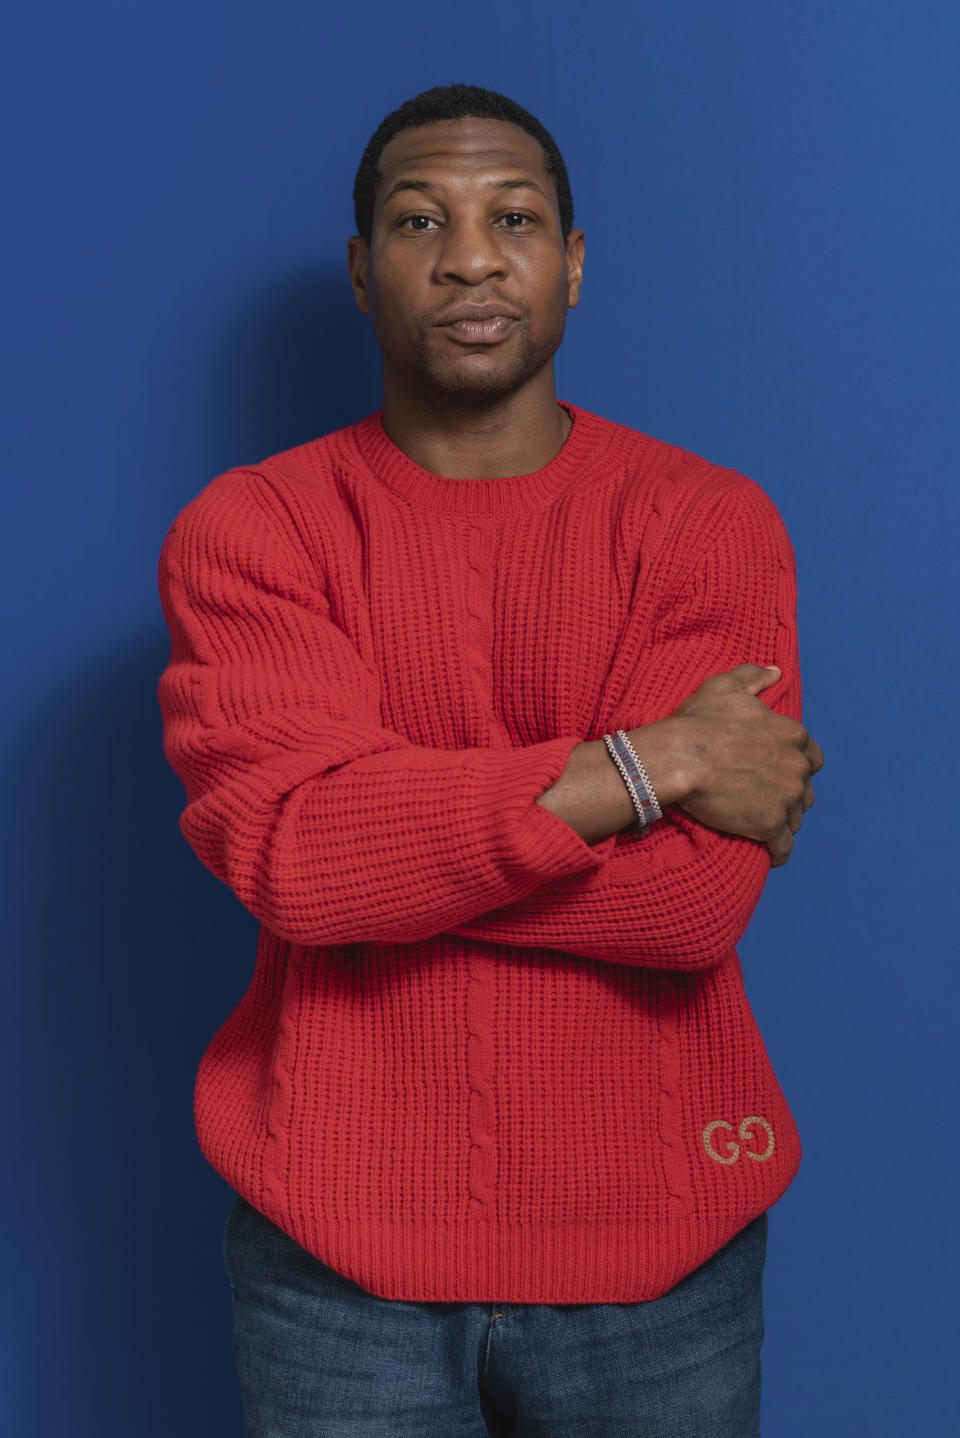 This Dec. 2, 2019 photo shows actor Jonathan Majors during a portrait session in New York. Majors was named one of the breakthrough artists of the year by the Associated Press. (Photo by Christopher Smith/Invision/AP)